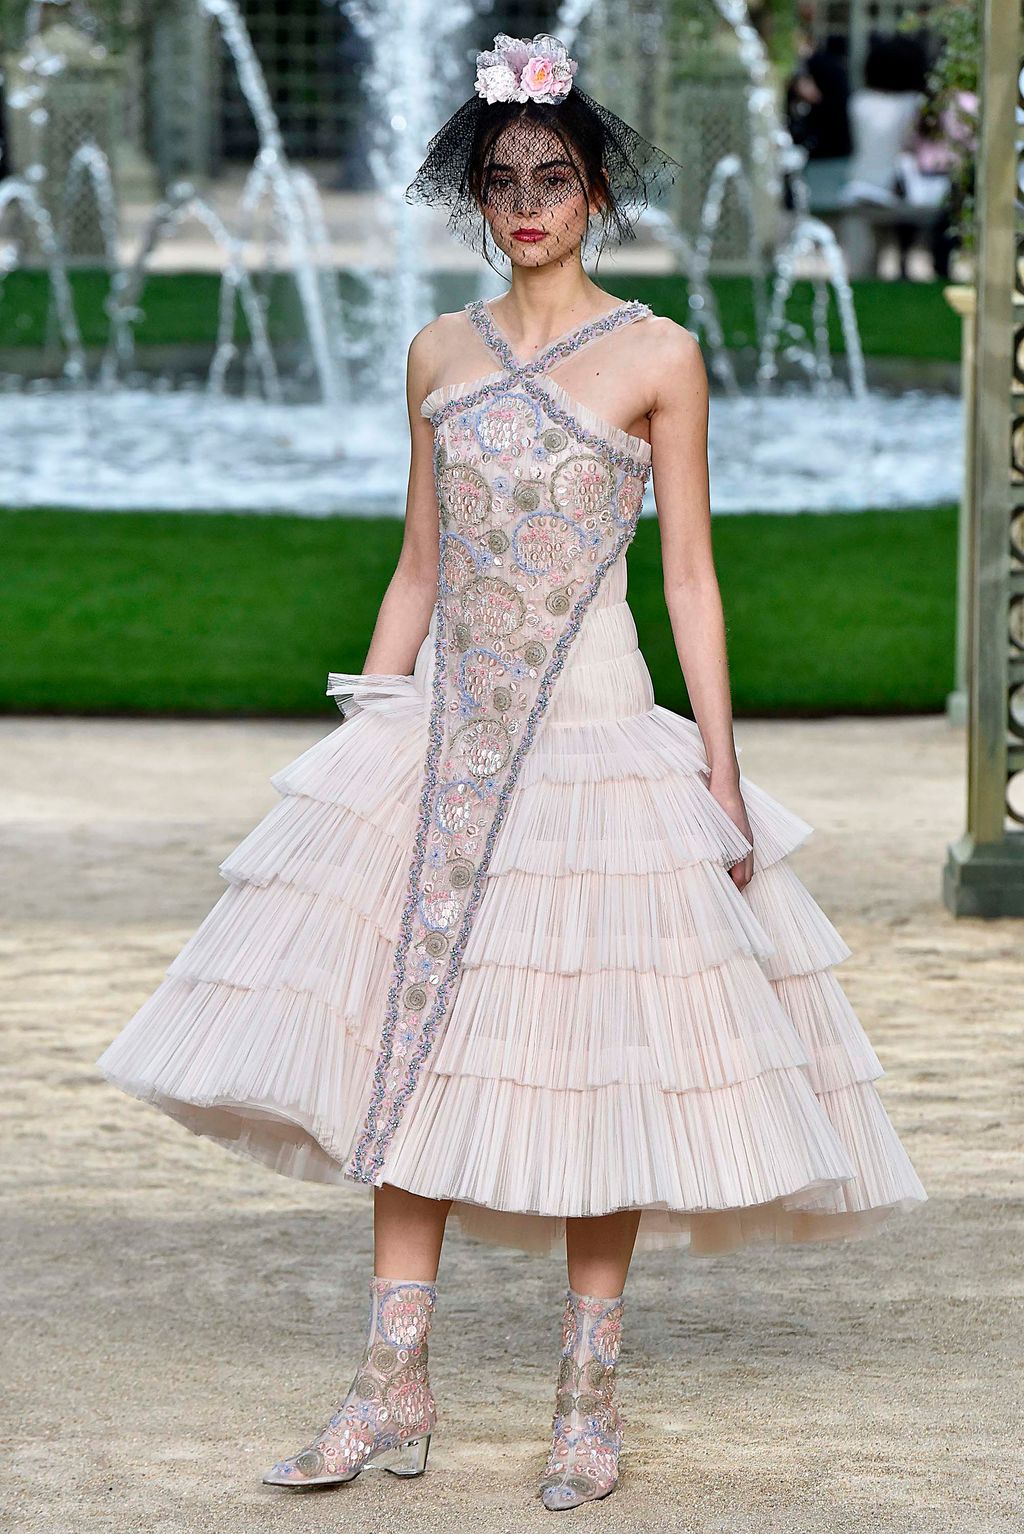 Chanel S/S 18 couture #56 - Tagwalk: The Fashion Search Engine